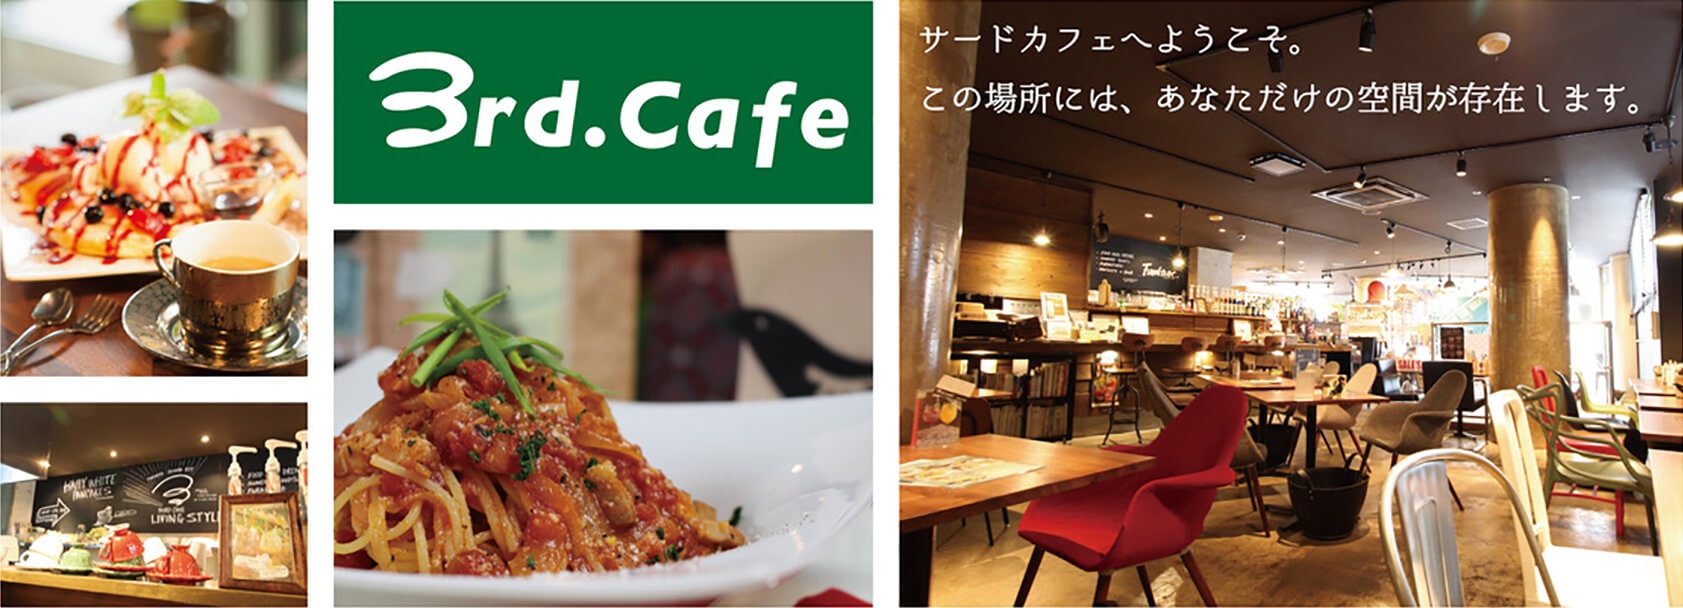 3rd cafe main01